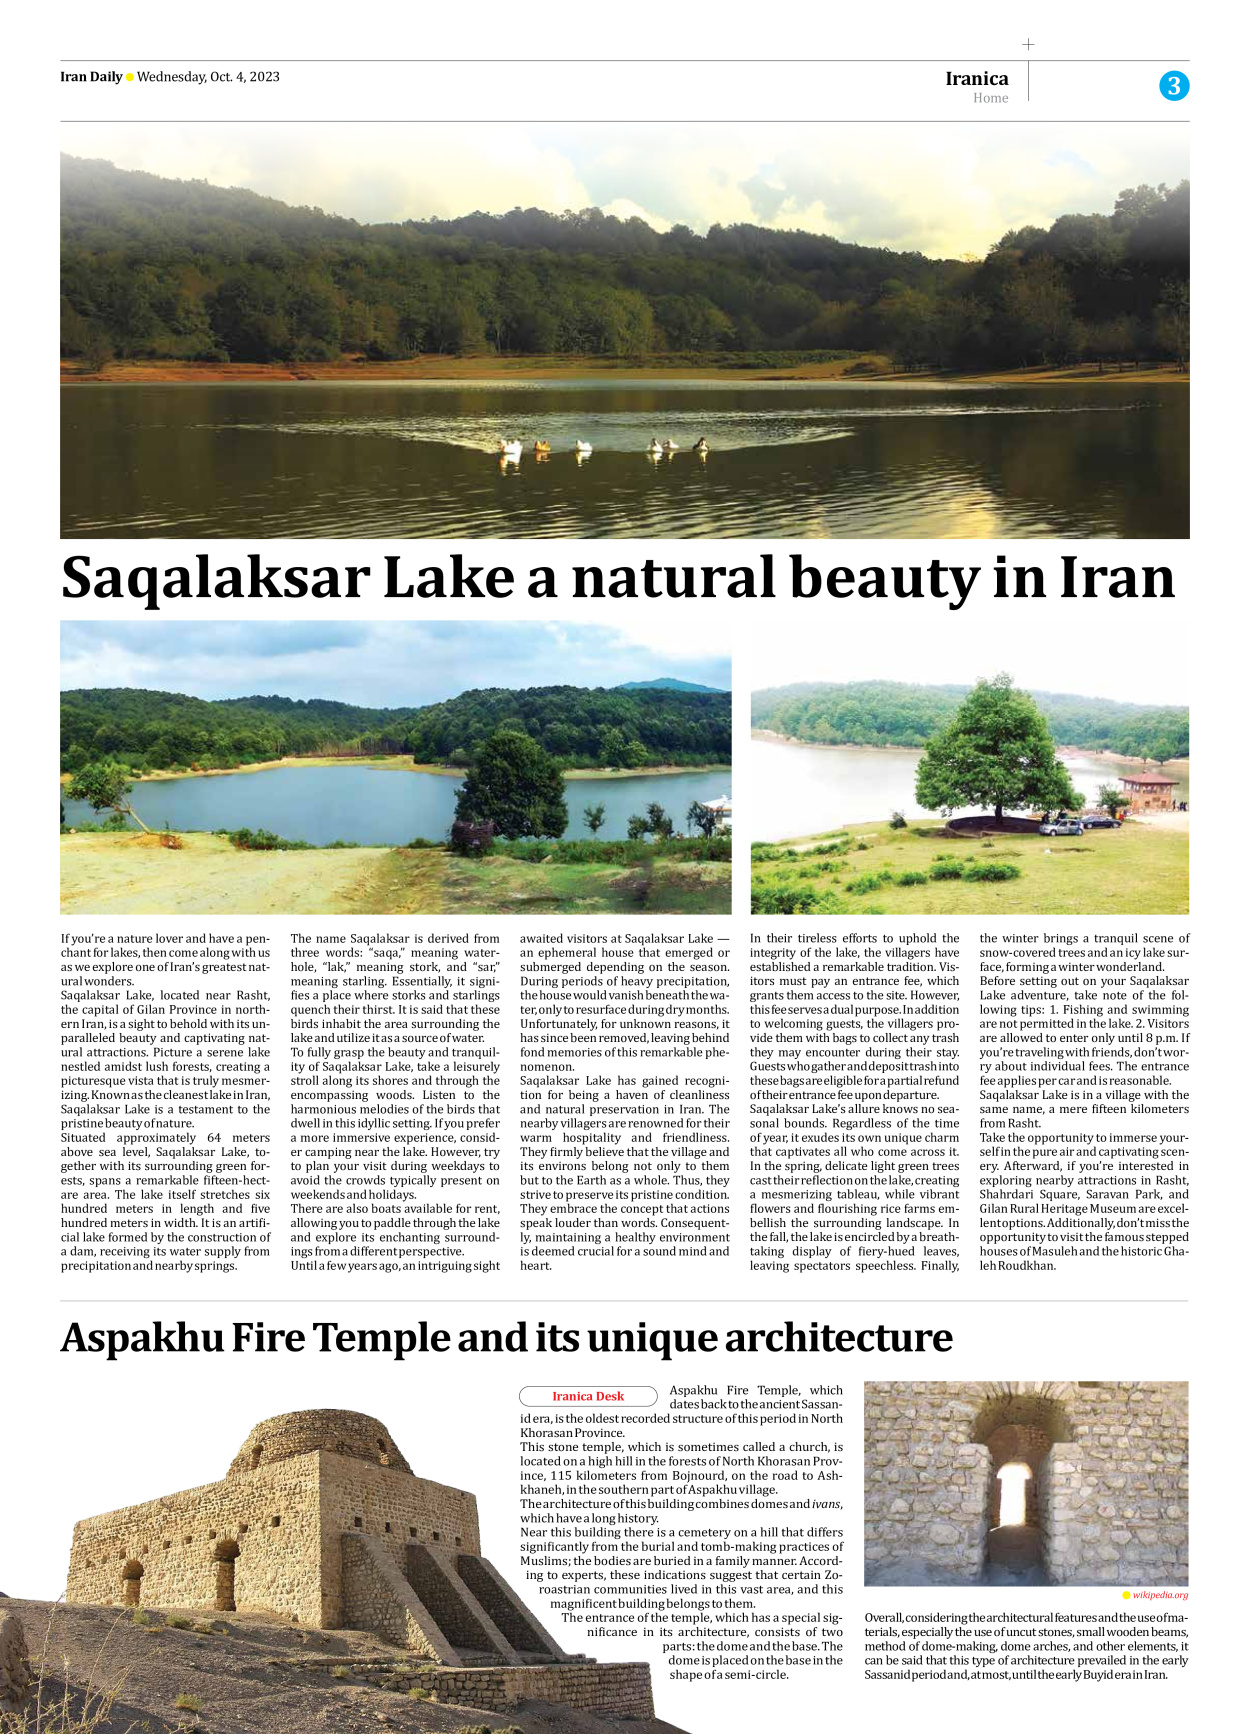 Iran Daily - Number Seven Thousand Three Hundred and Ninety Nine - 04 October 2023 - Page 3